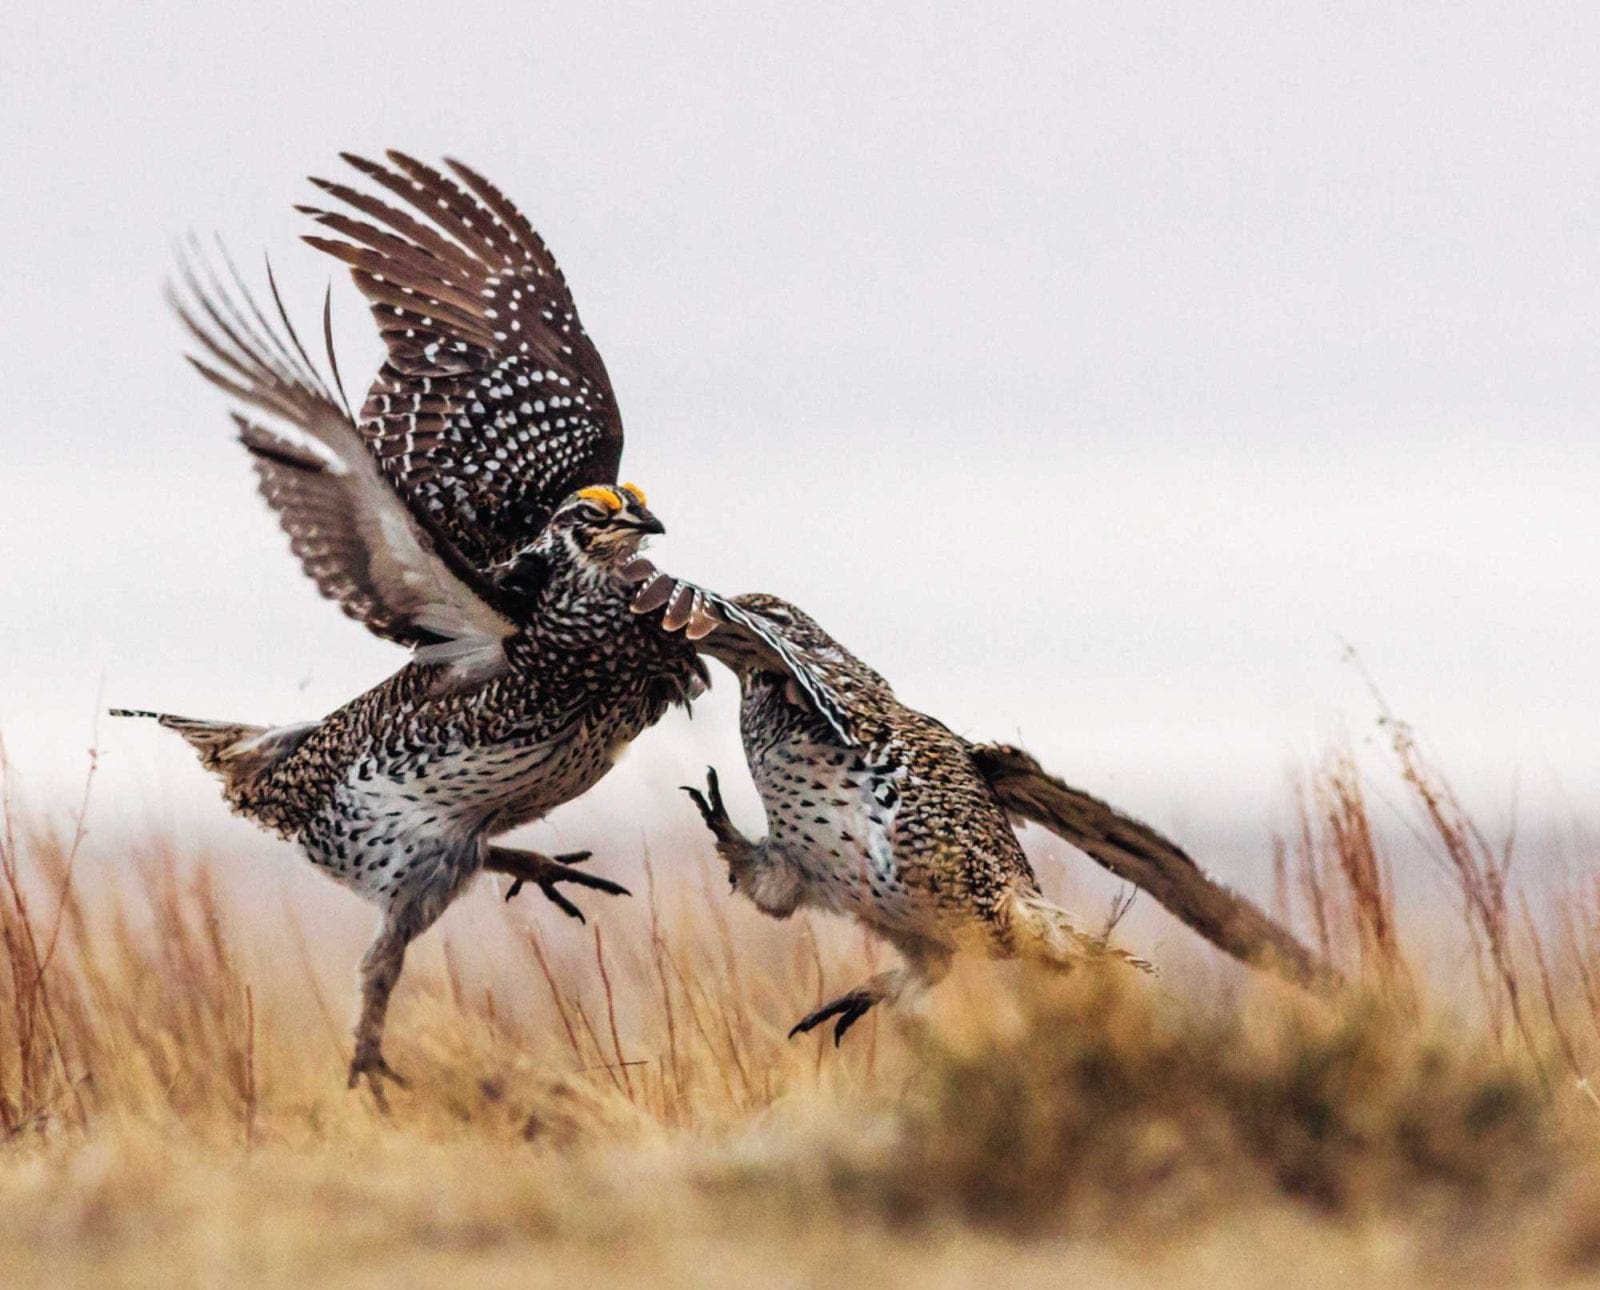 A Sharp-tailed grouse doing a mating dance in a field